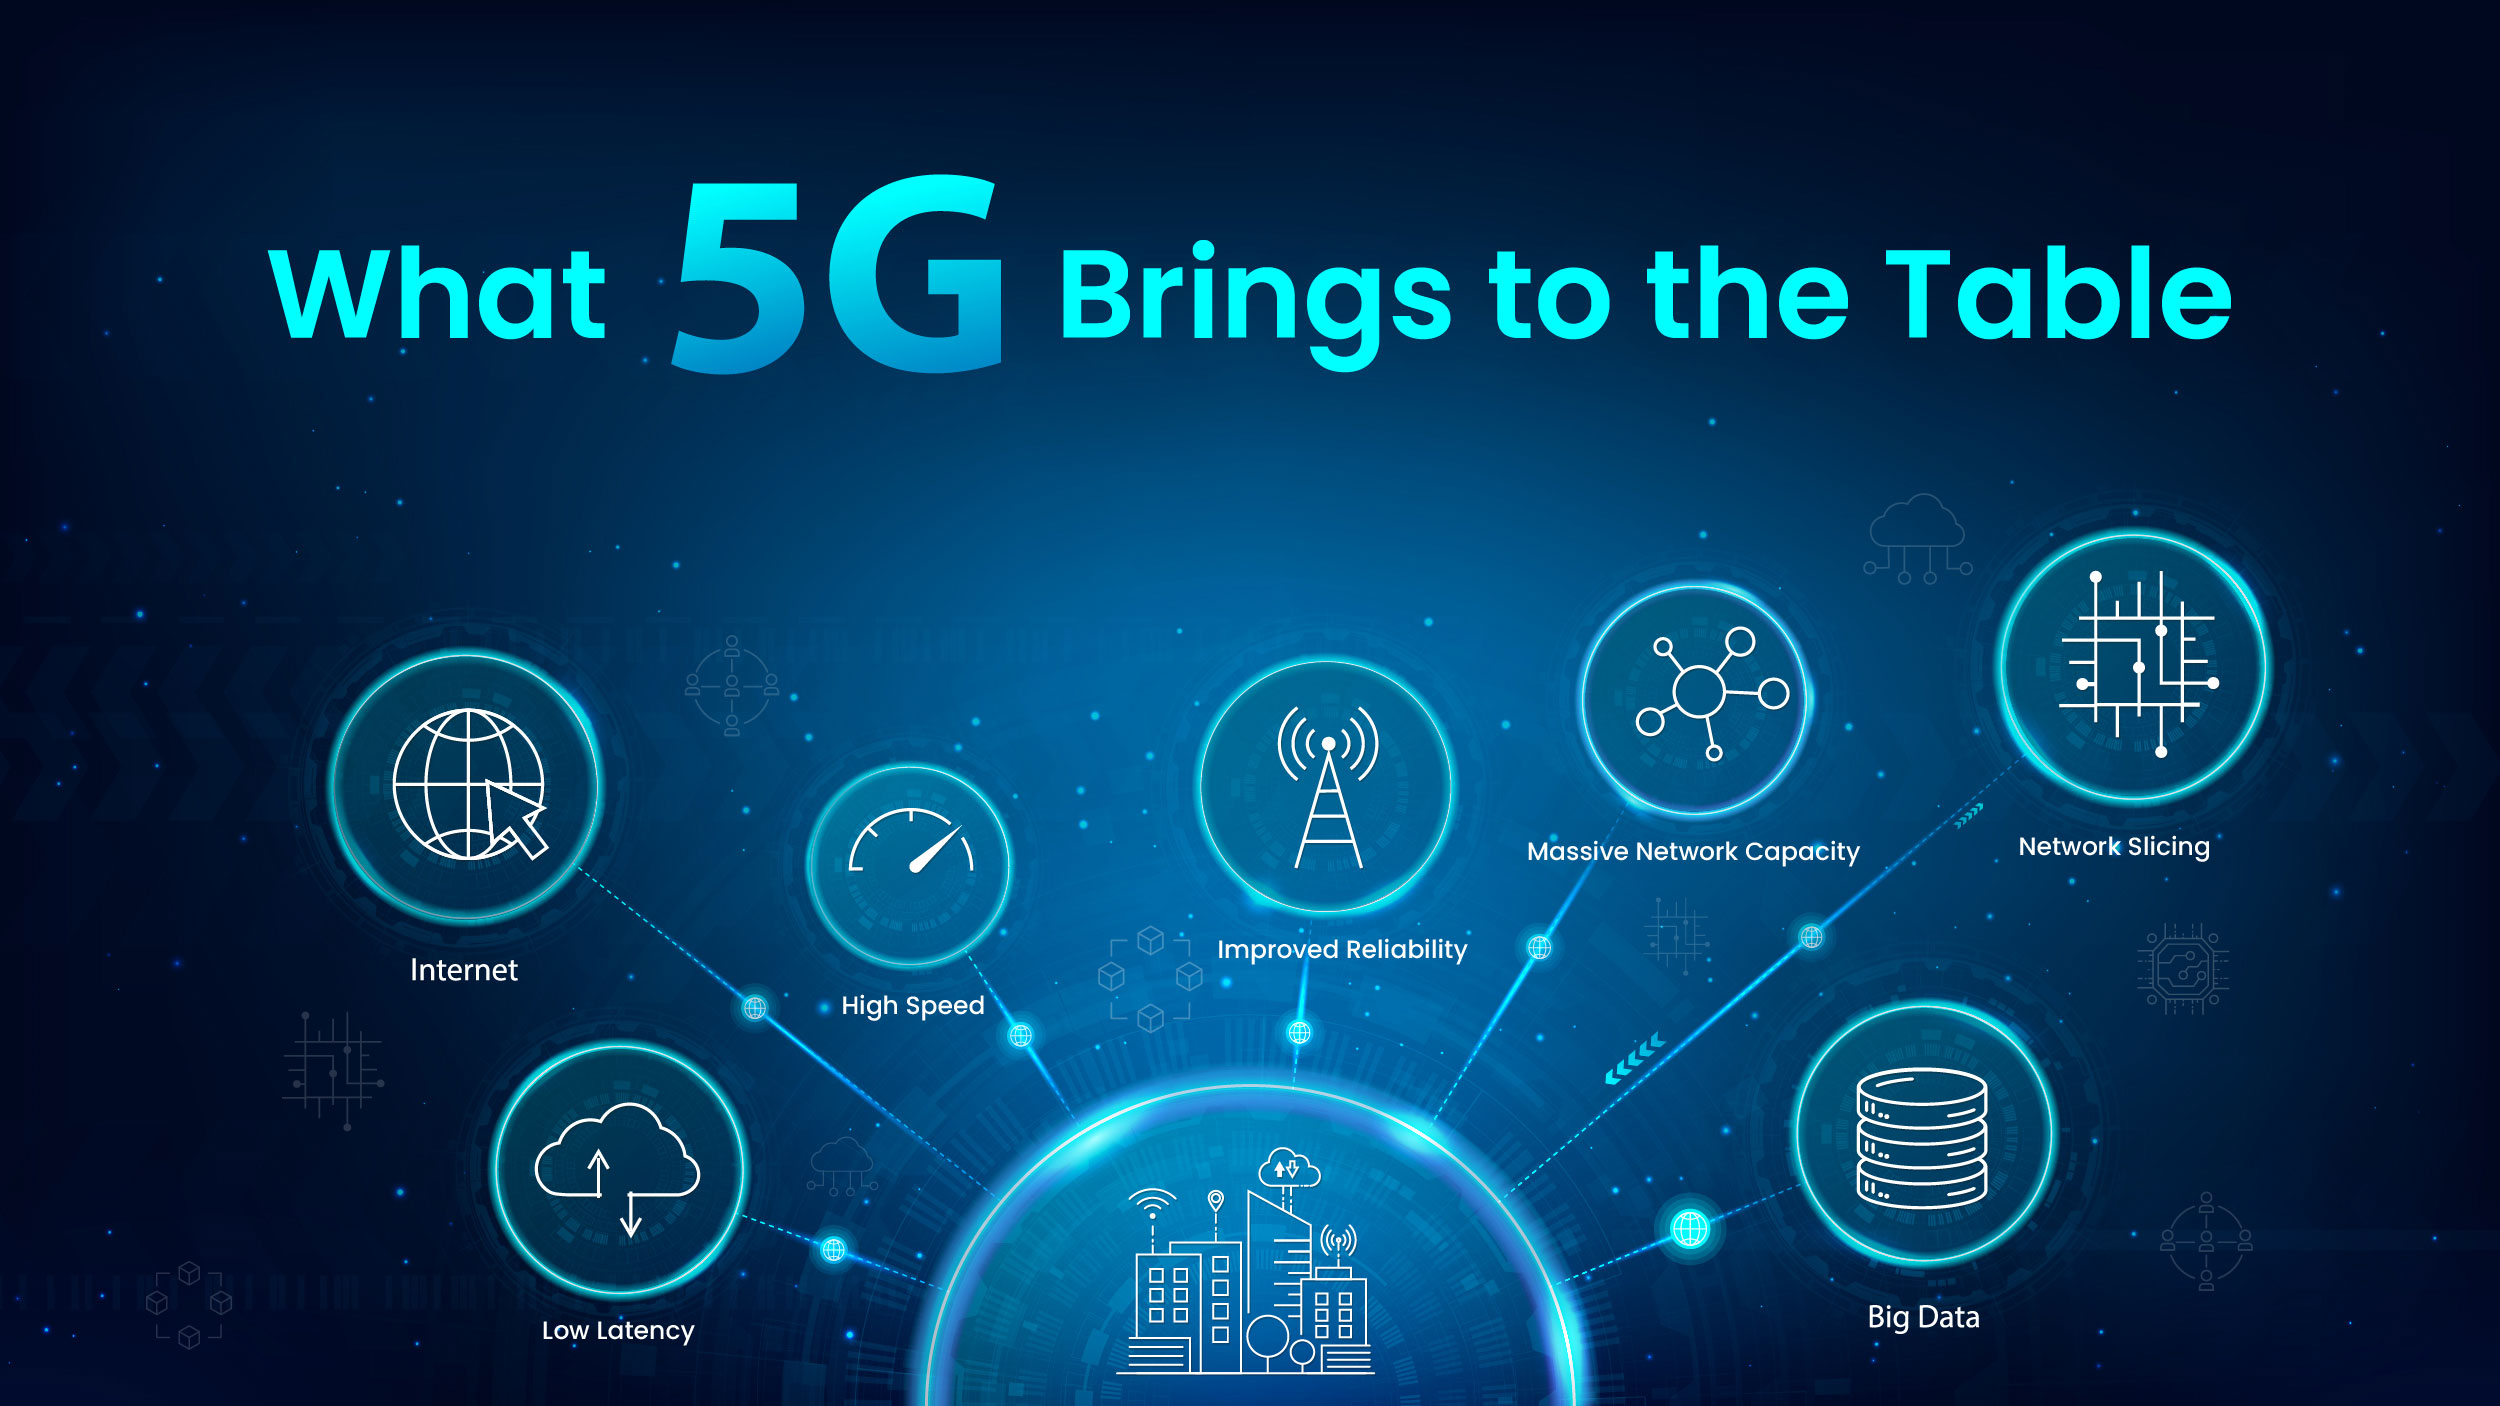 5G will unleash a new era for industries